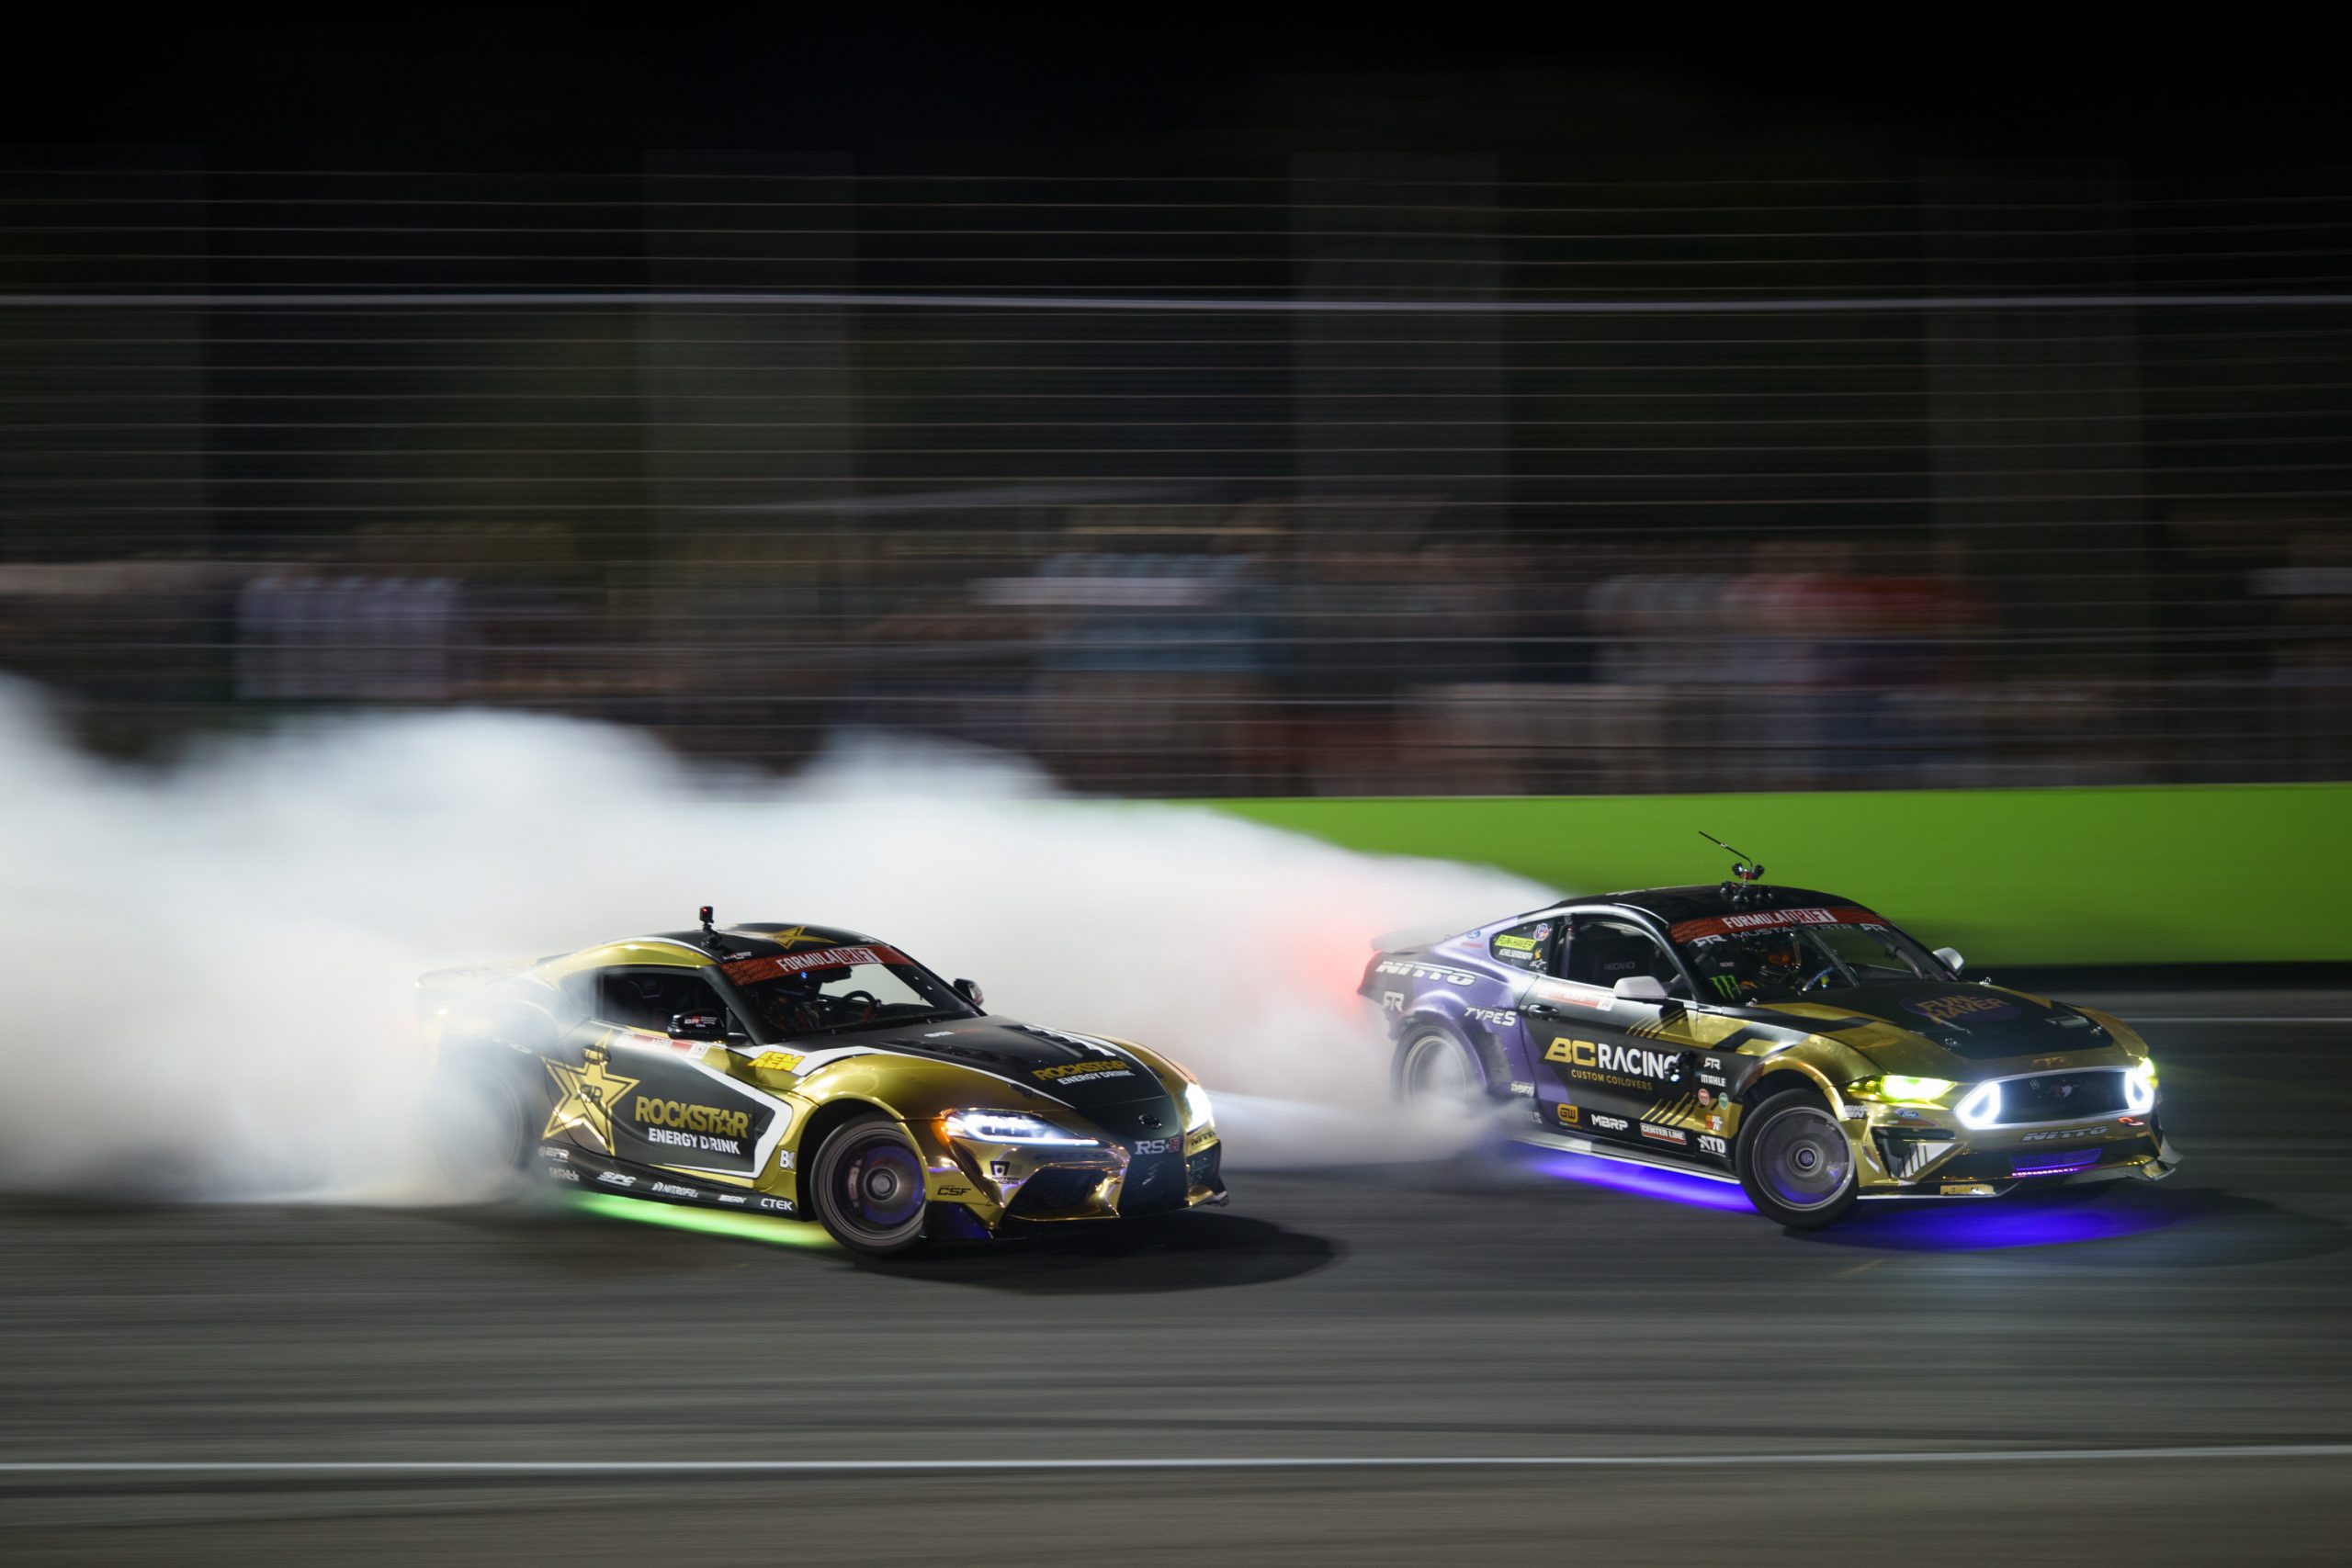 COMPETITION RESULTS FROM THE ORLANDO ROUND OF THE 2021 FORMULA DRIFT CHAMPIONSHIPS - Formula